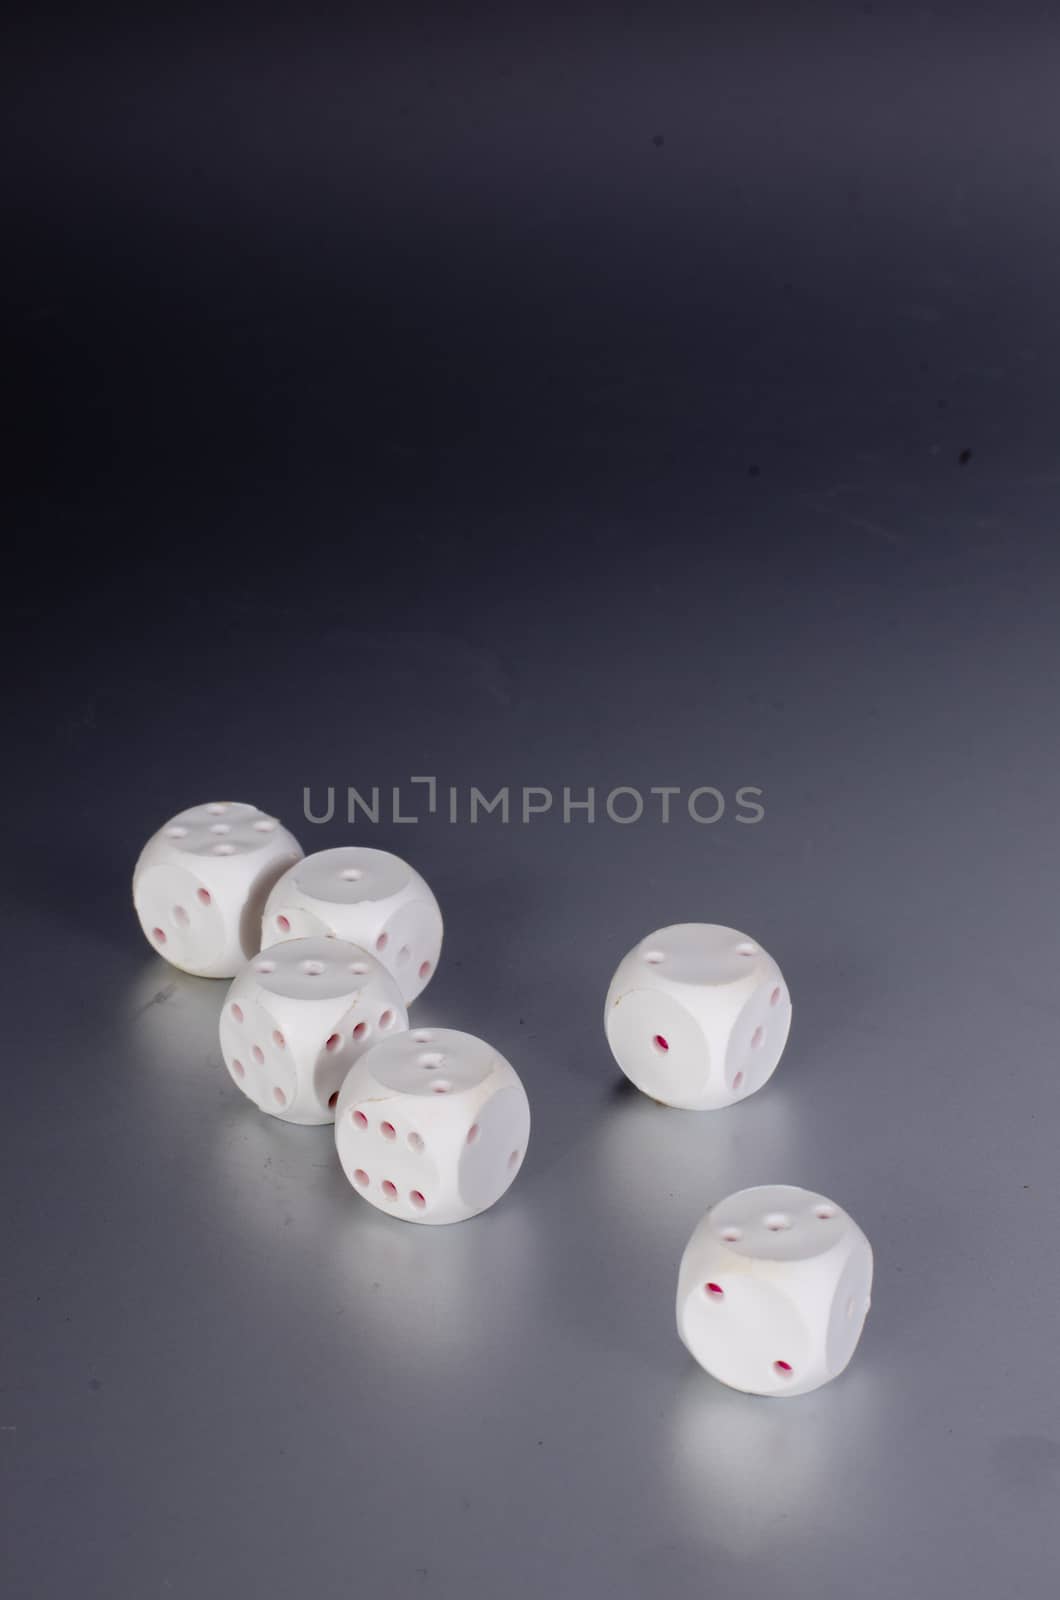 dice by sarkao